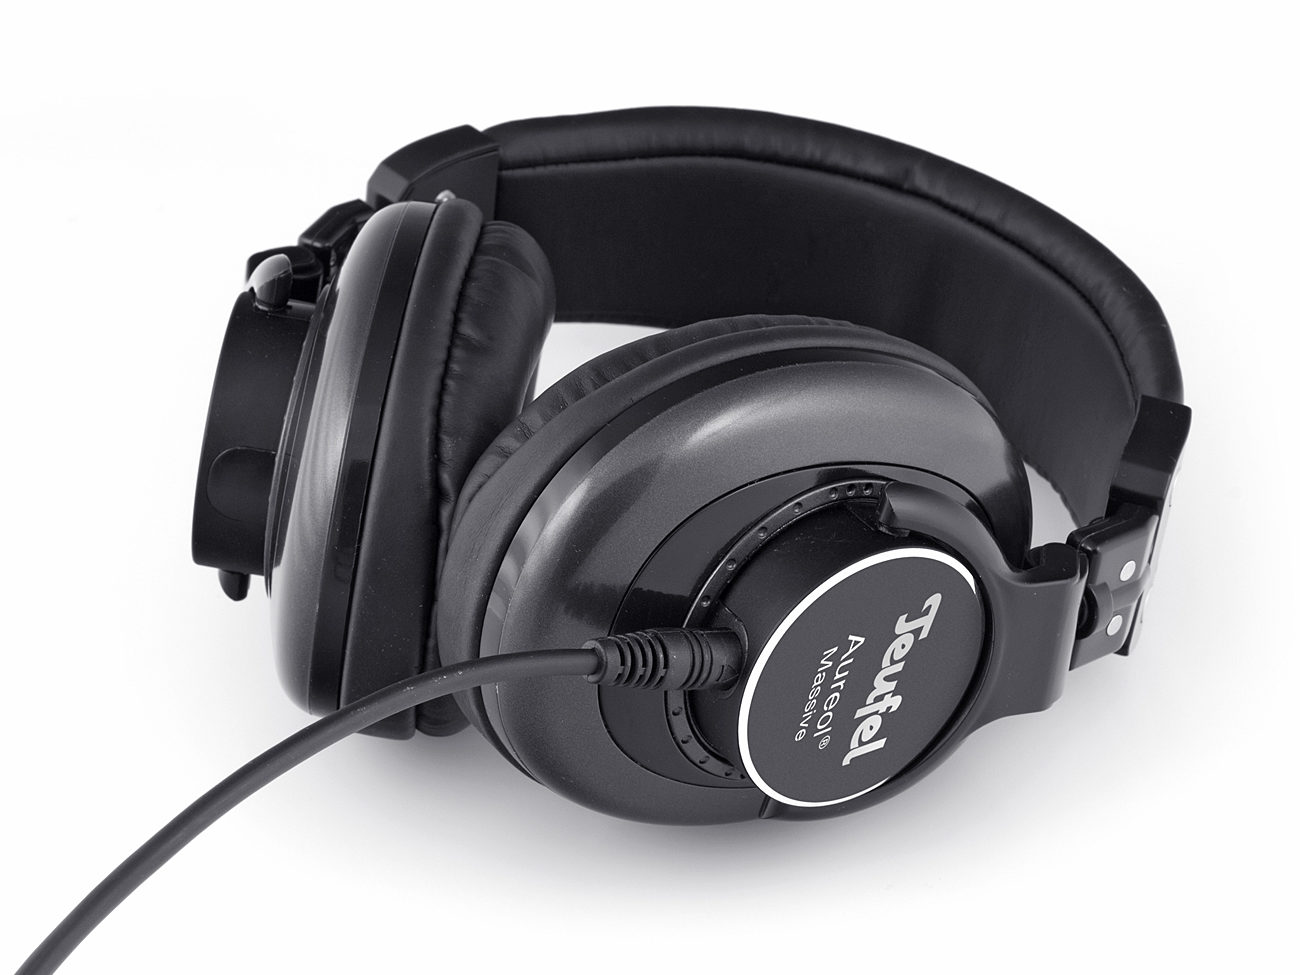 Offenes headset - Unser TOP-Favorit 